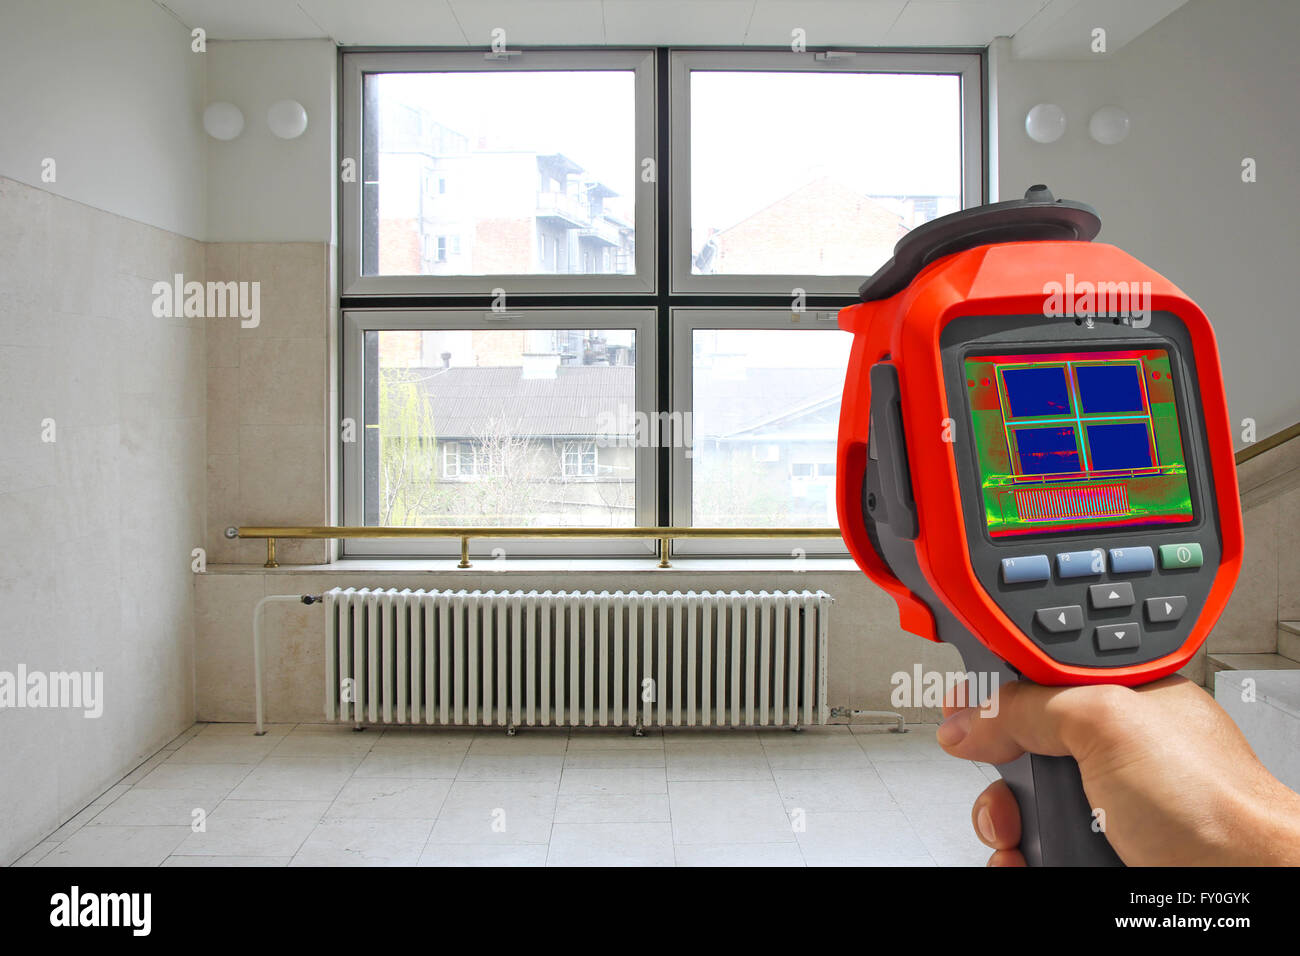 Recording Radiator Heater and a window on a building using Infrared Thermal Camera Stock Photo